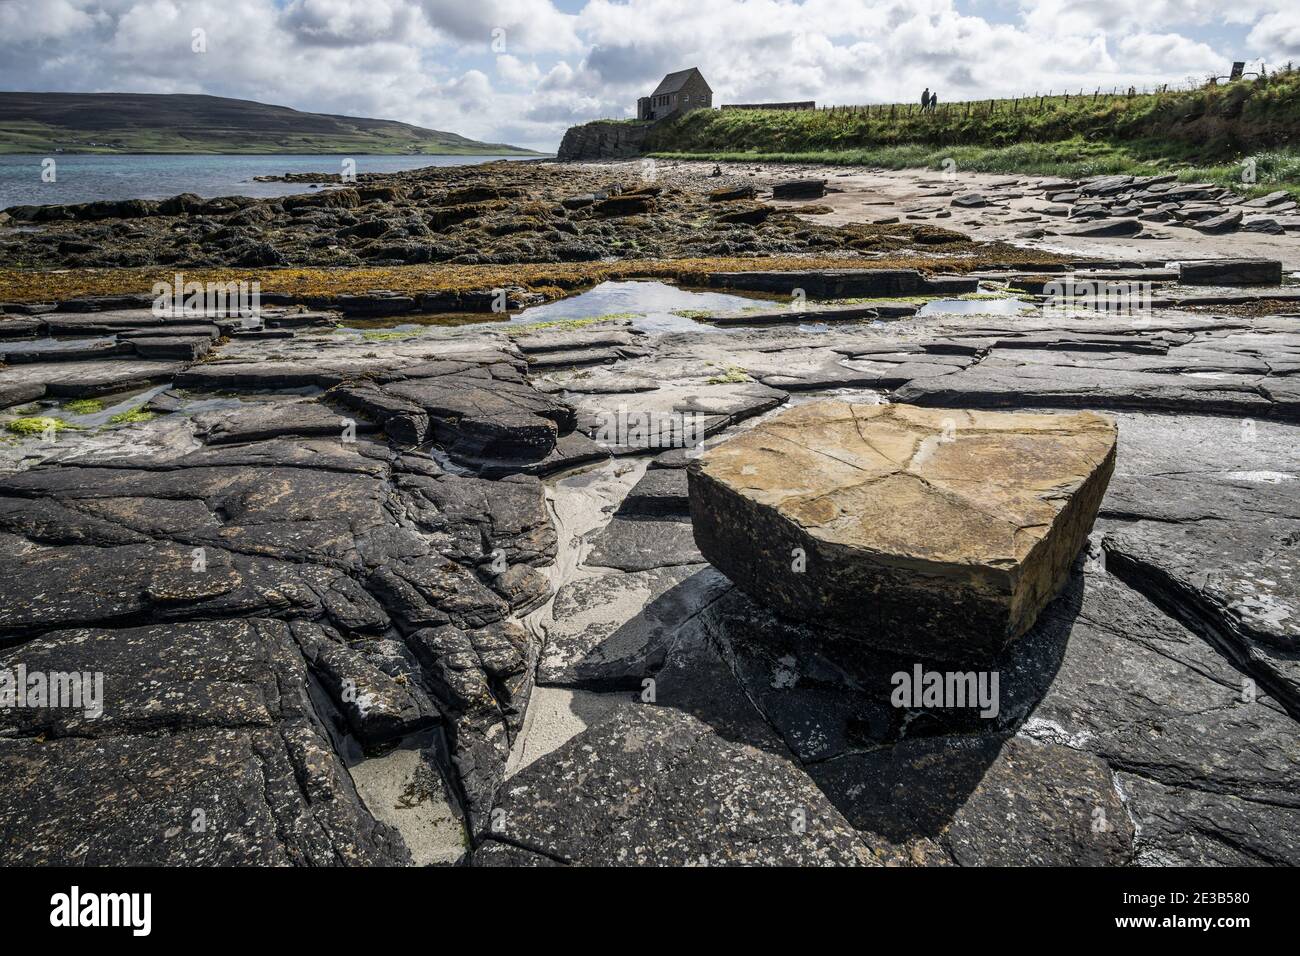 View of the rocks and beach at the Broch of Gurness, the Iron Age village  on Orkney. Rocks, sea and Rousay island visible in the distance Stock Photo